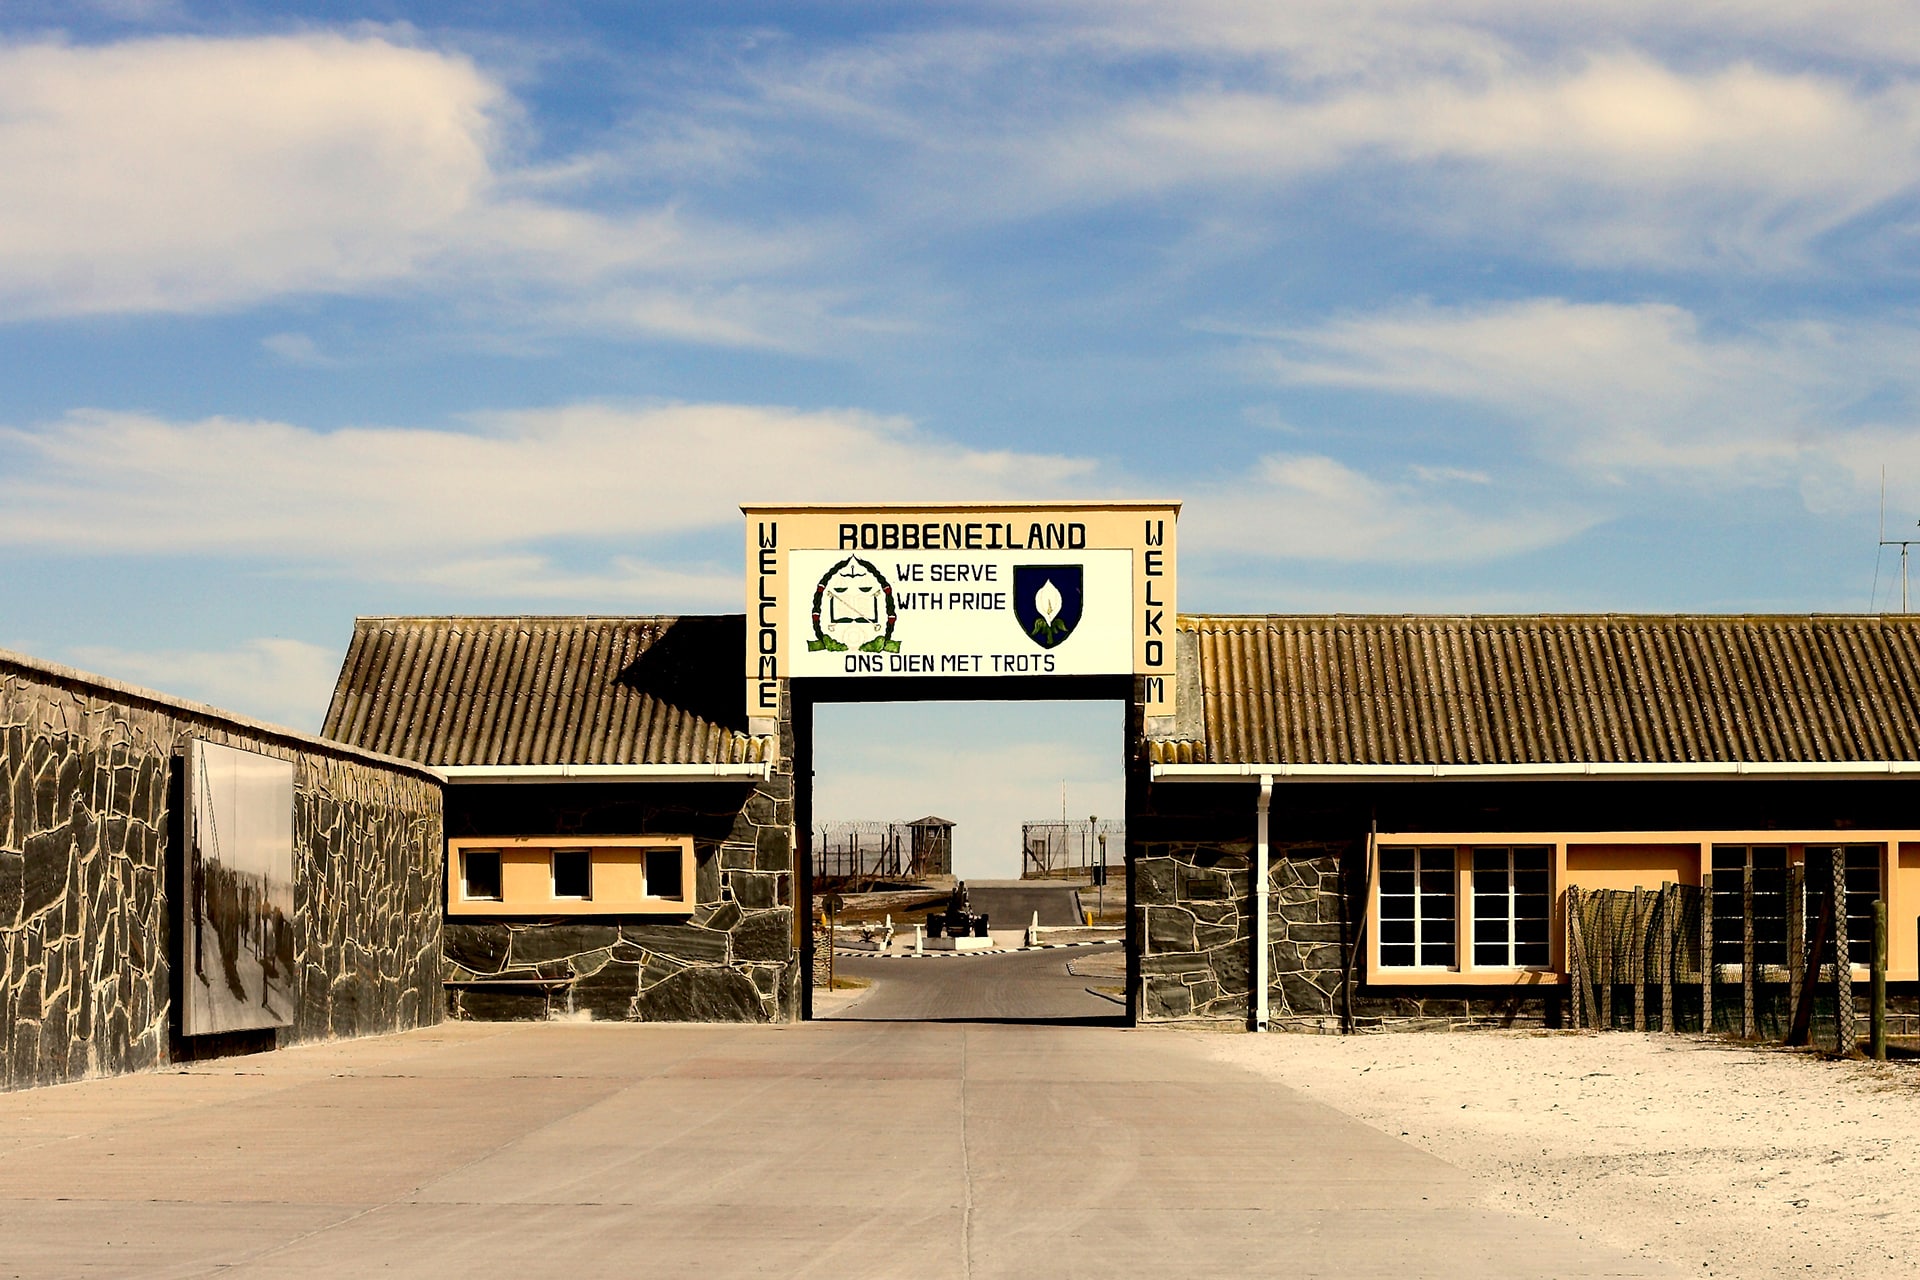 The entrance of Robben Island located off the coast of Cape Town in South Africa